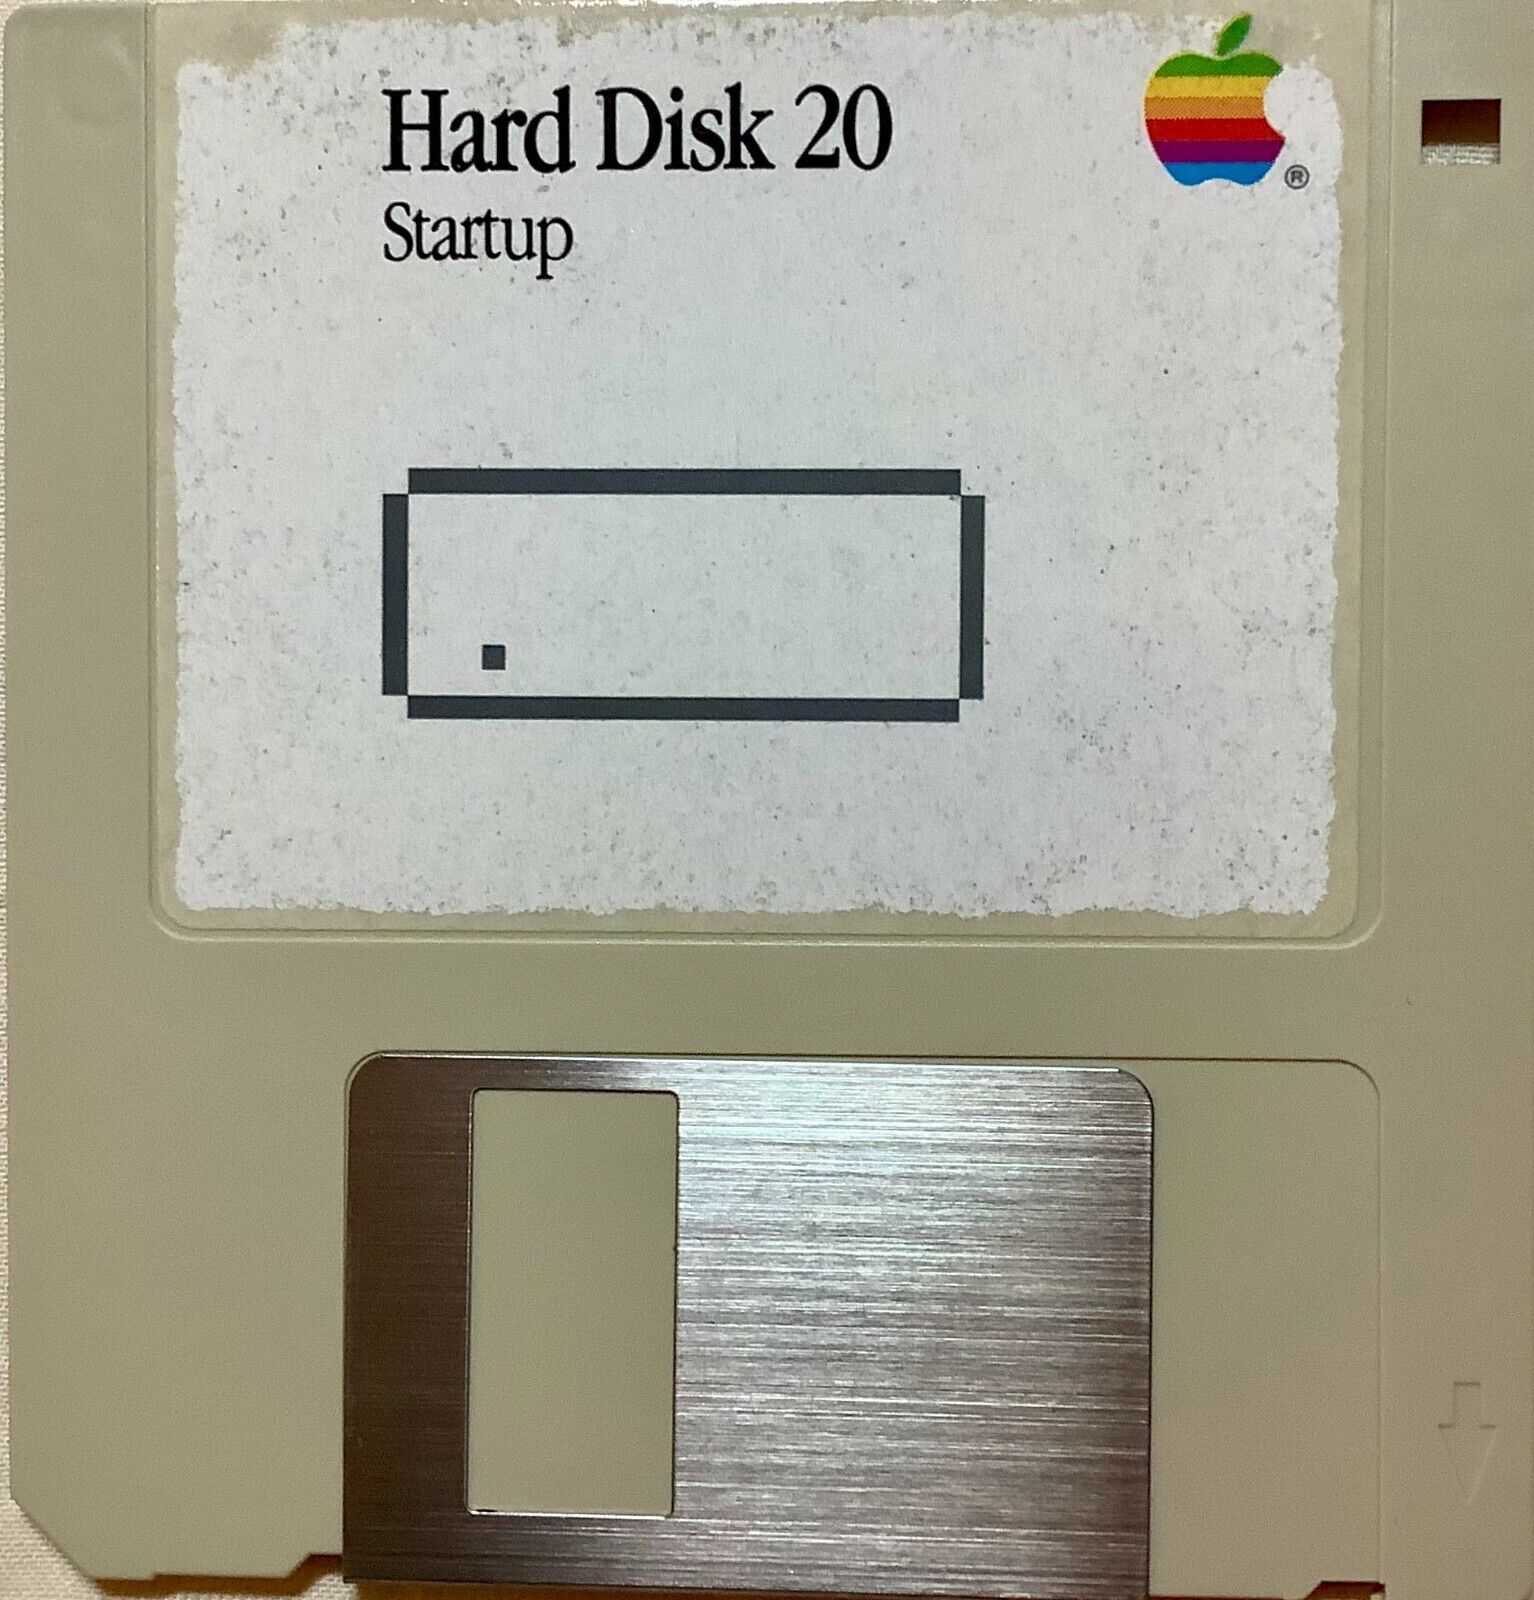 Macintosh Hard Disk 20 Startup -- 690-5067-A --  Apple Collector's Guide 